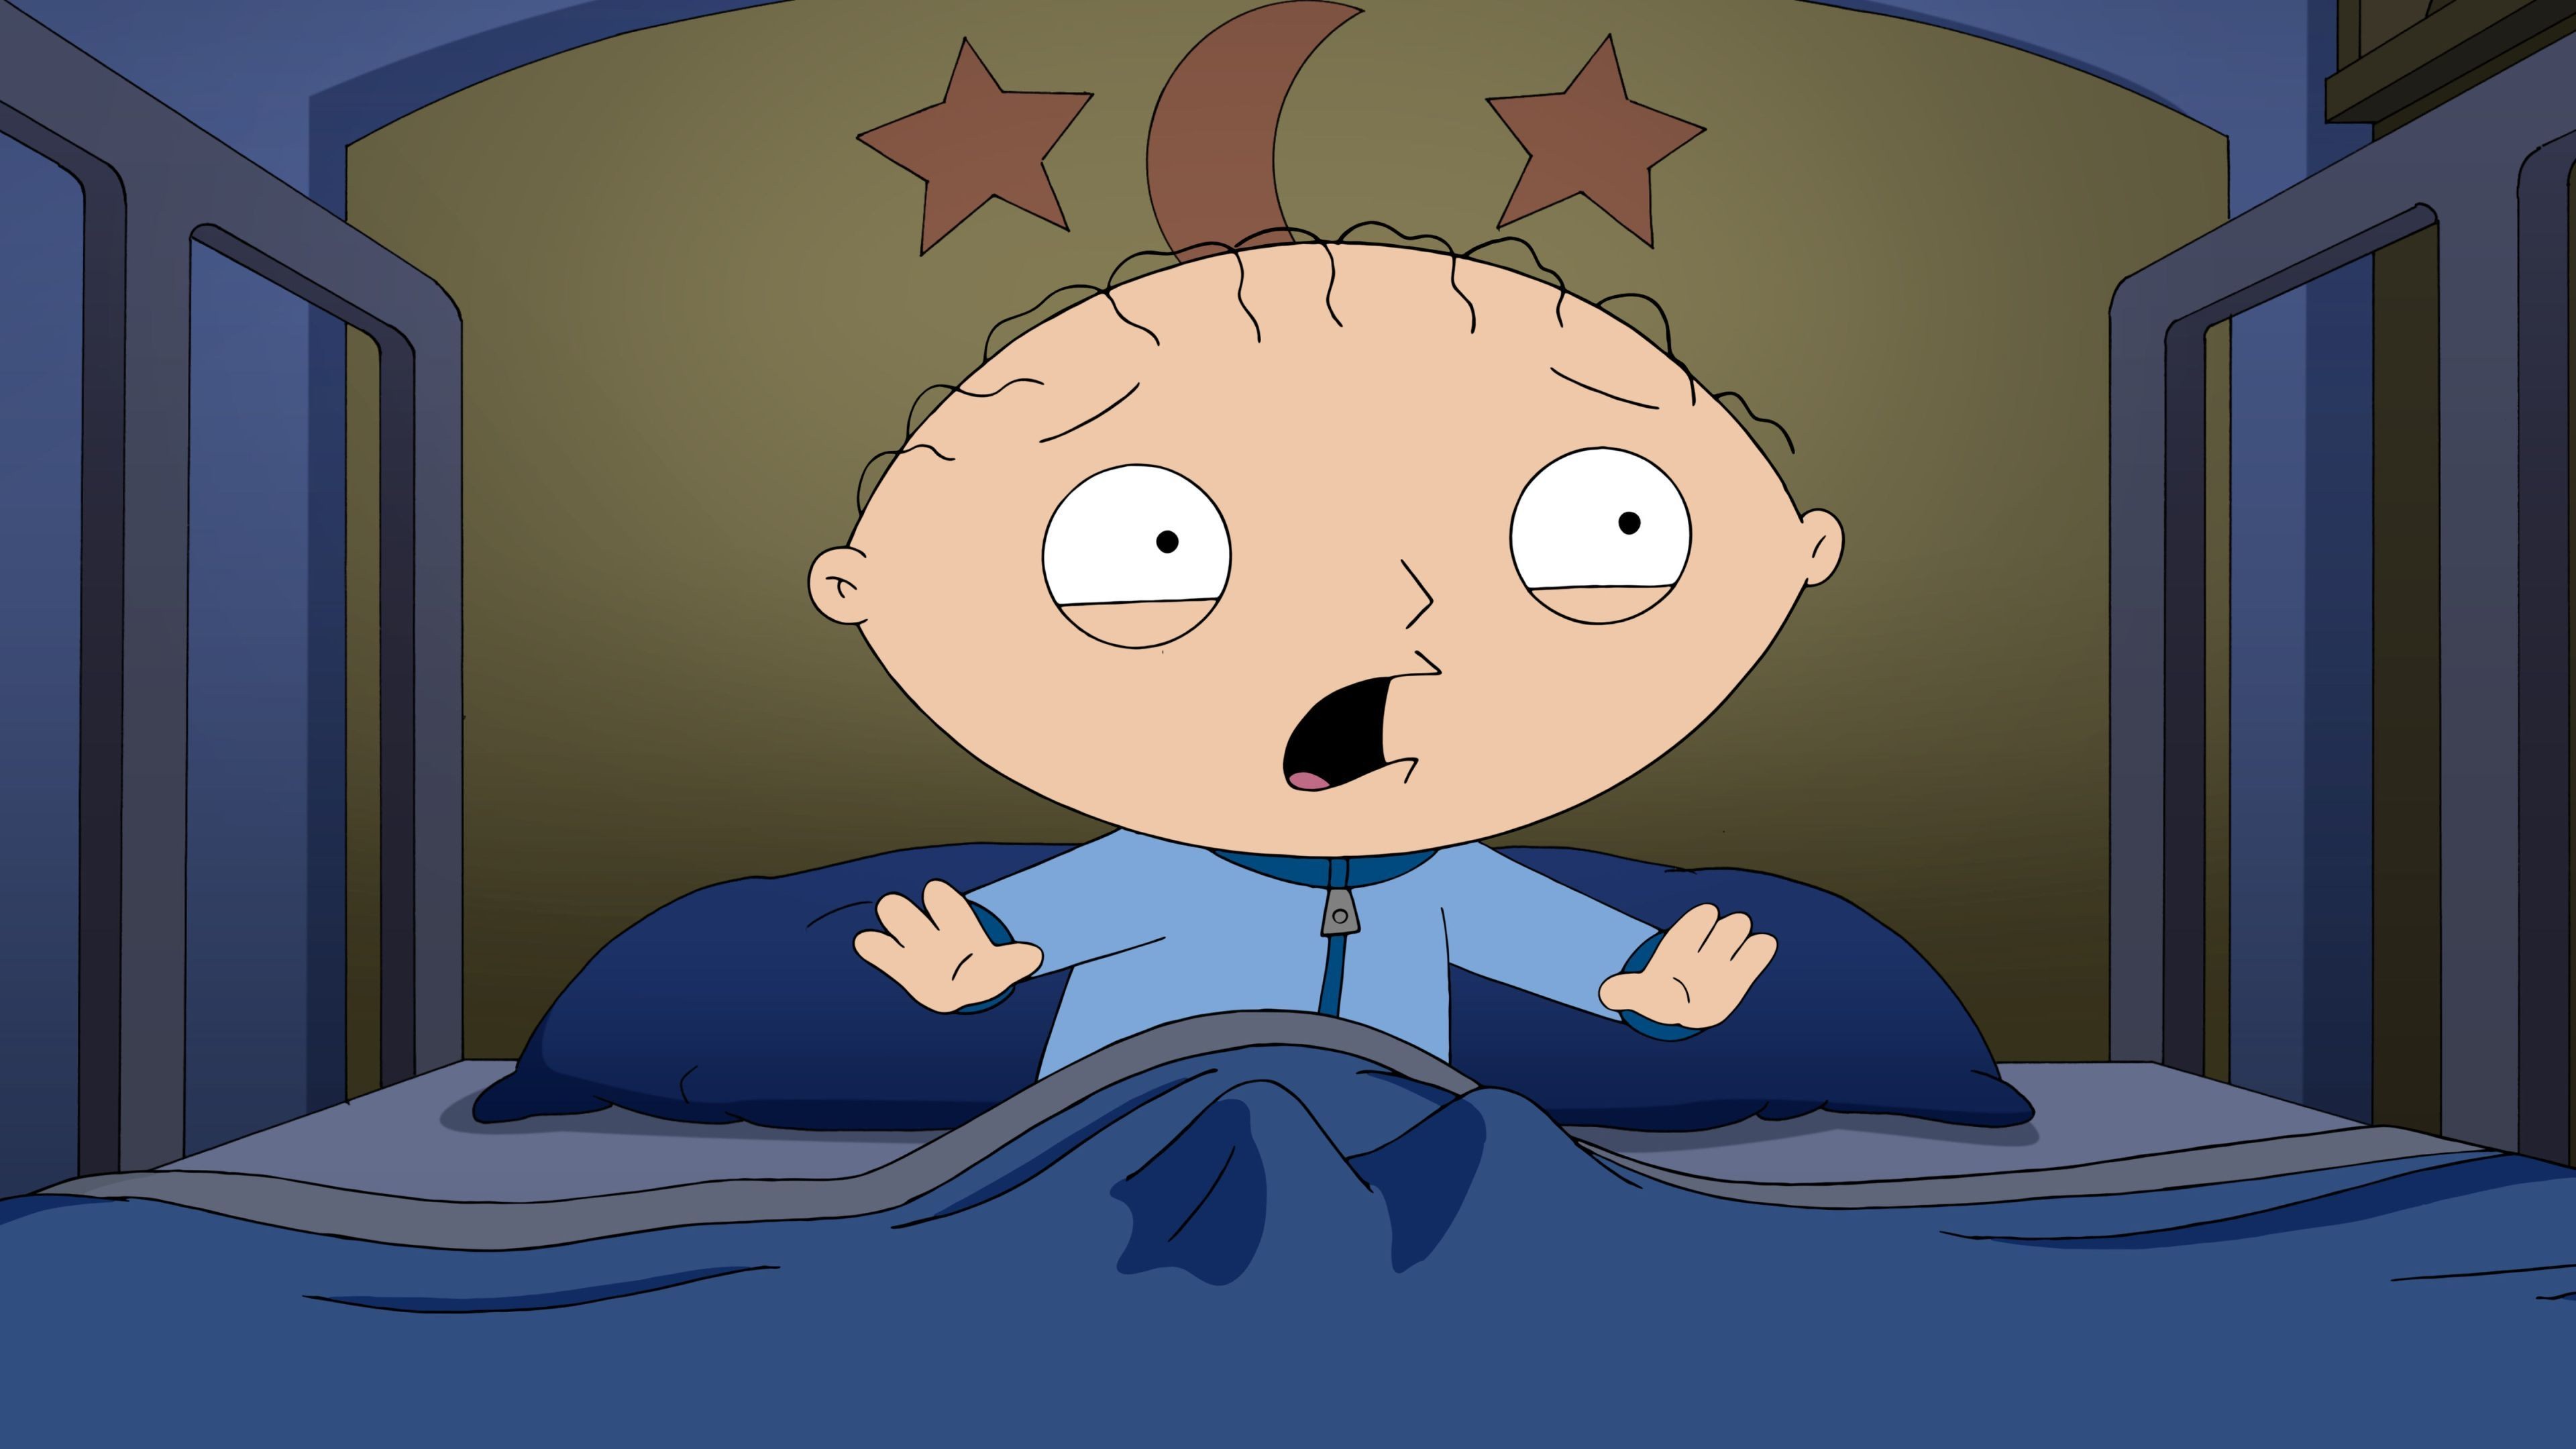 Stewie Griffin In Family Guy Animated Sitcom 4k Wallpaper - Stewie Scream Family Guy - HD Wallpaper 